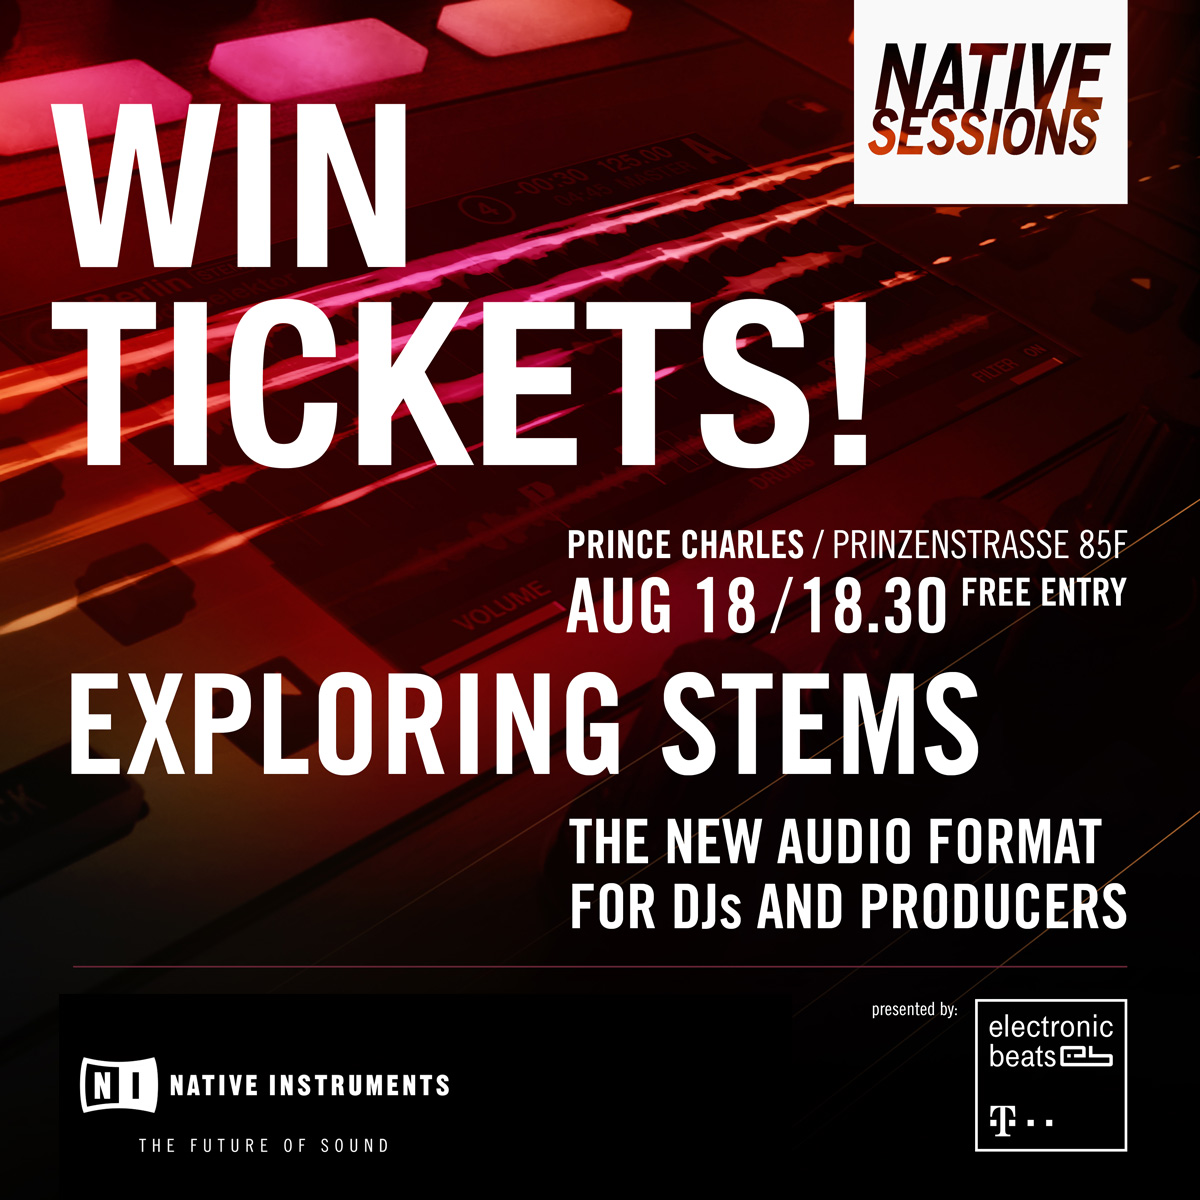 NI-NATIVE_SESSIONS_Flyer_Entwurf1